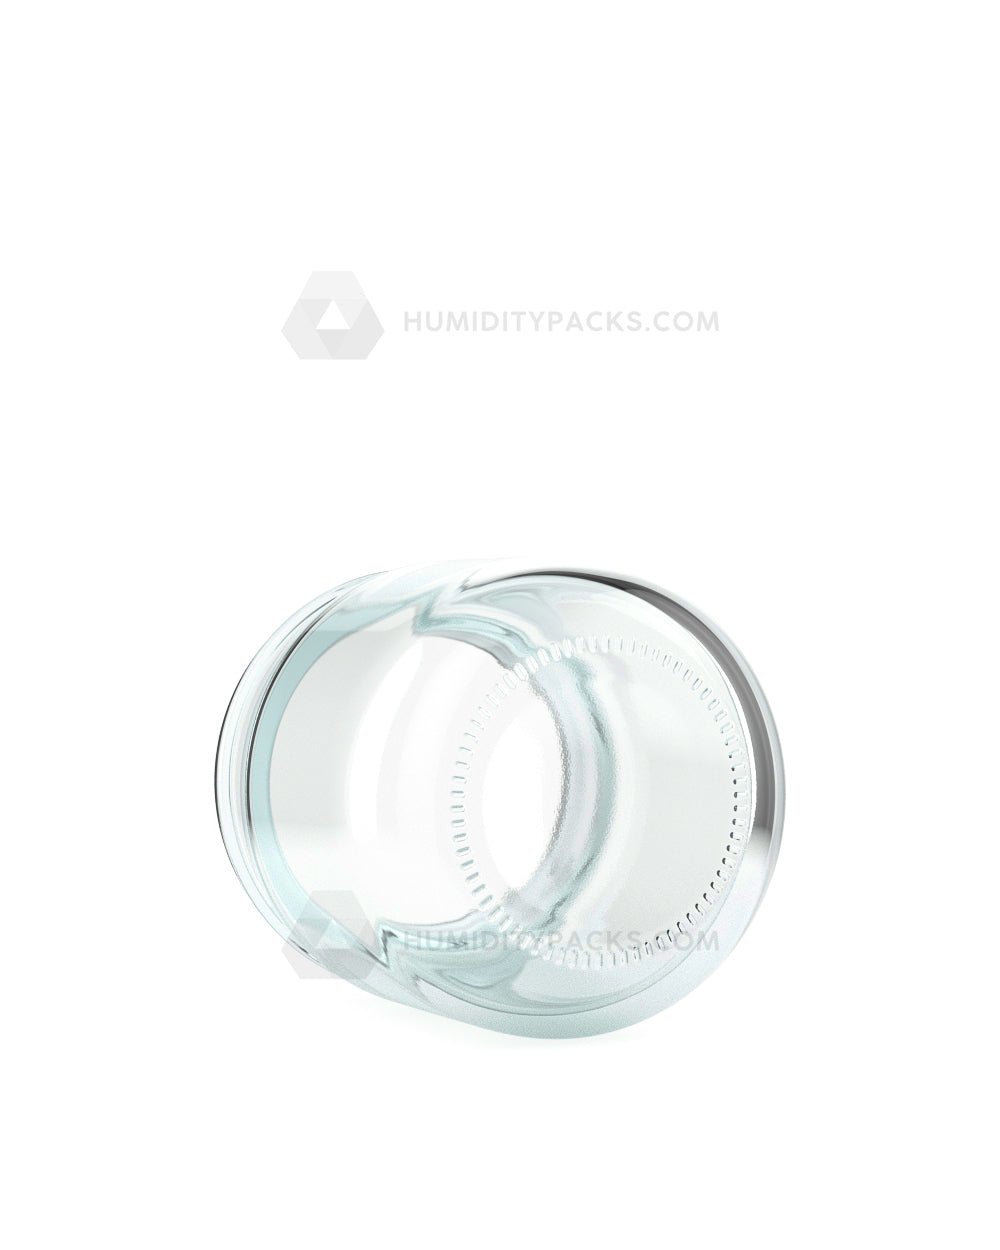 53mm Rounded Base Clear 2.5oz Glass Jar 32/Box Humidity Packs - 4